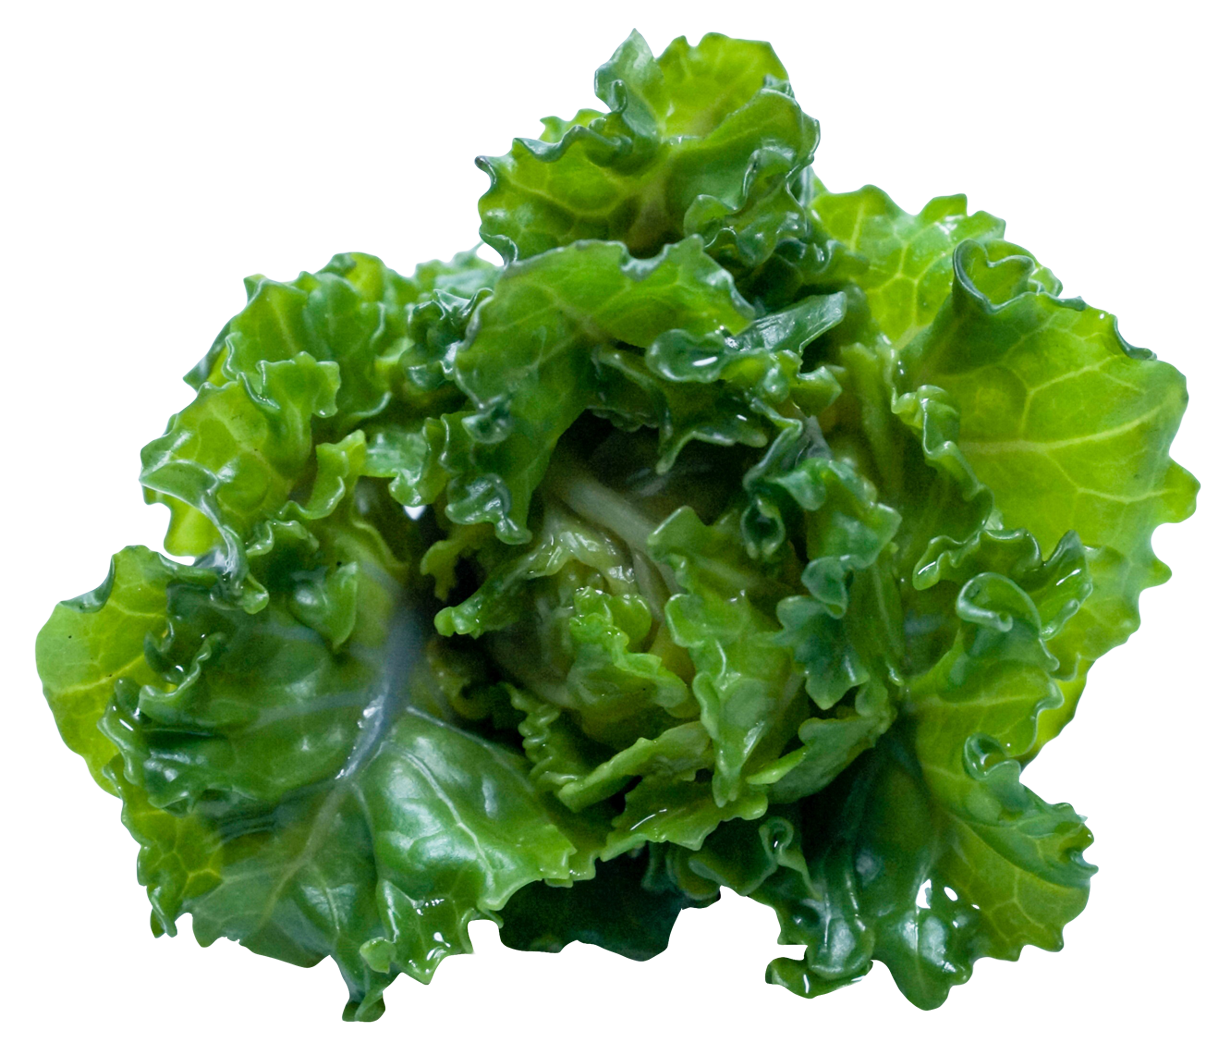 A Green Leafy Vegetable On A Black Background